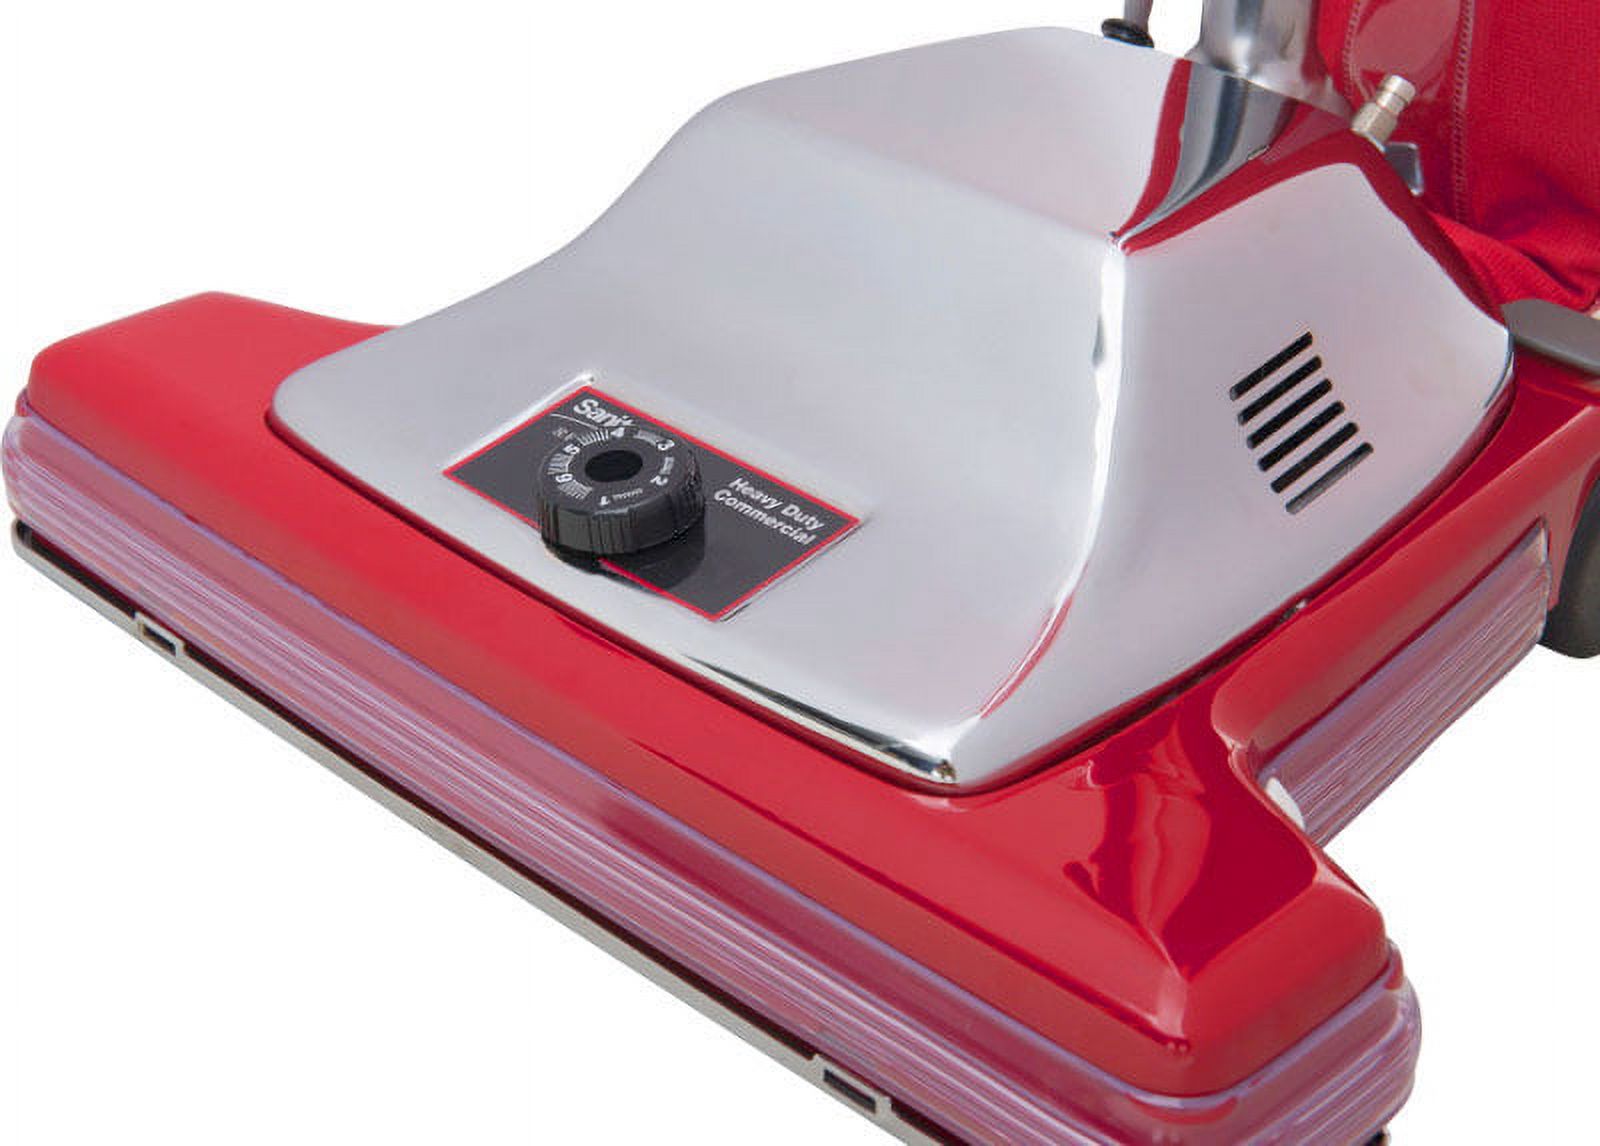 Sanitaire Widetrack Commercial Upright Vacuum w/Vibra Groomer, 16" Path, 18.5lb, Red - image 3 of 3